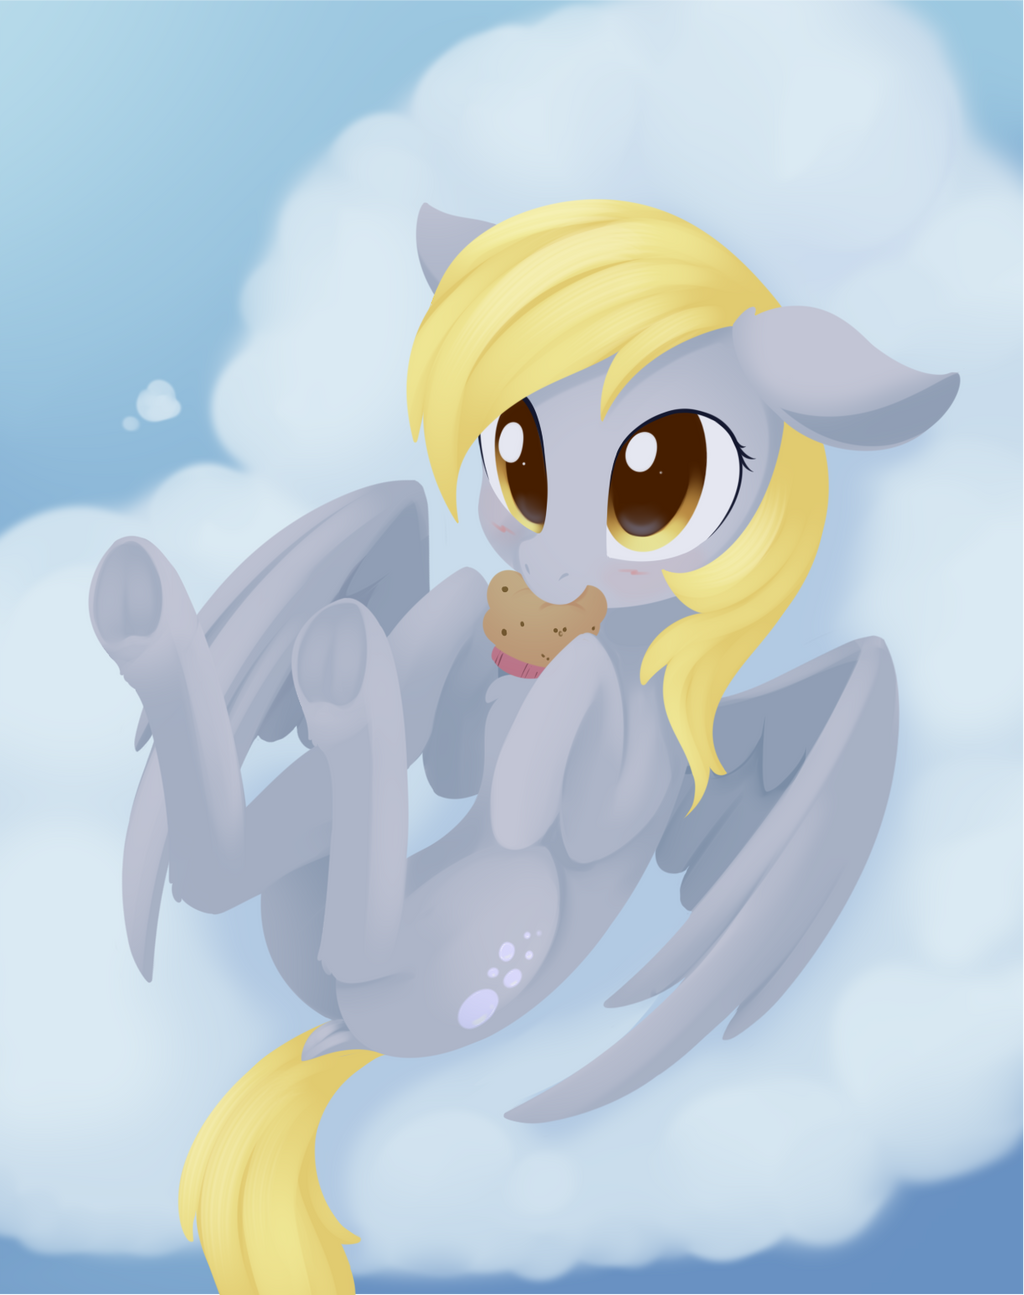 derpy_day_2021_by_dusthiel_def15v8-fullview.png